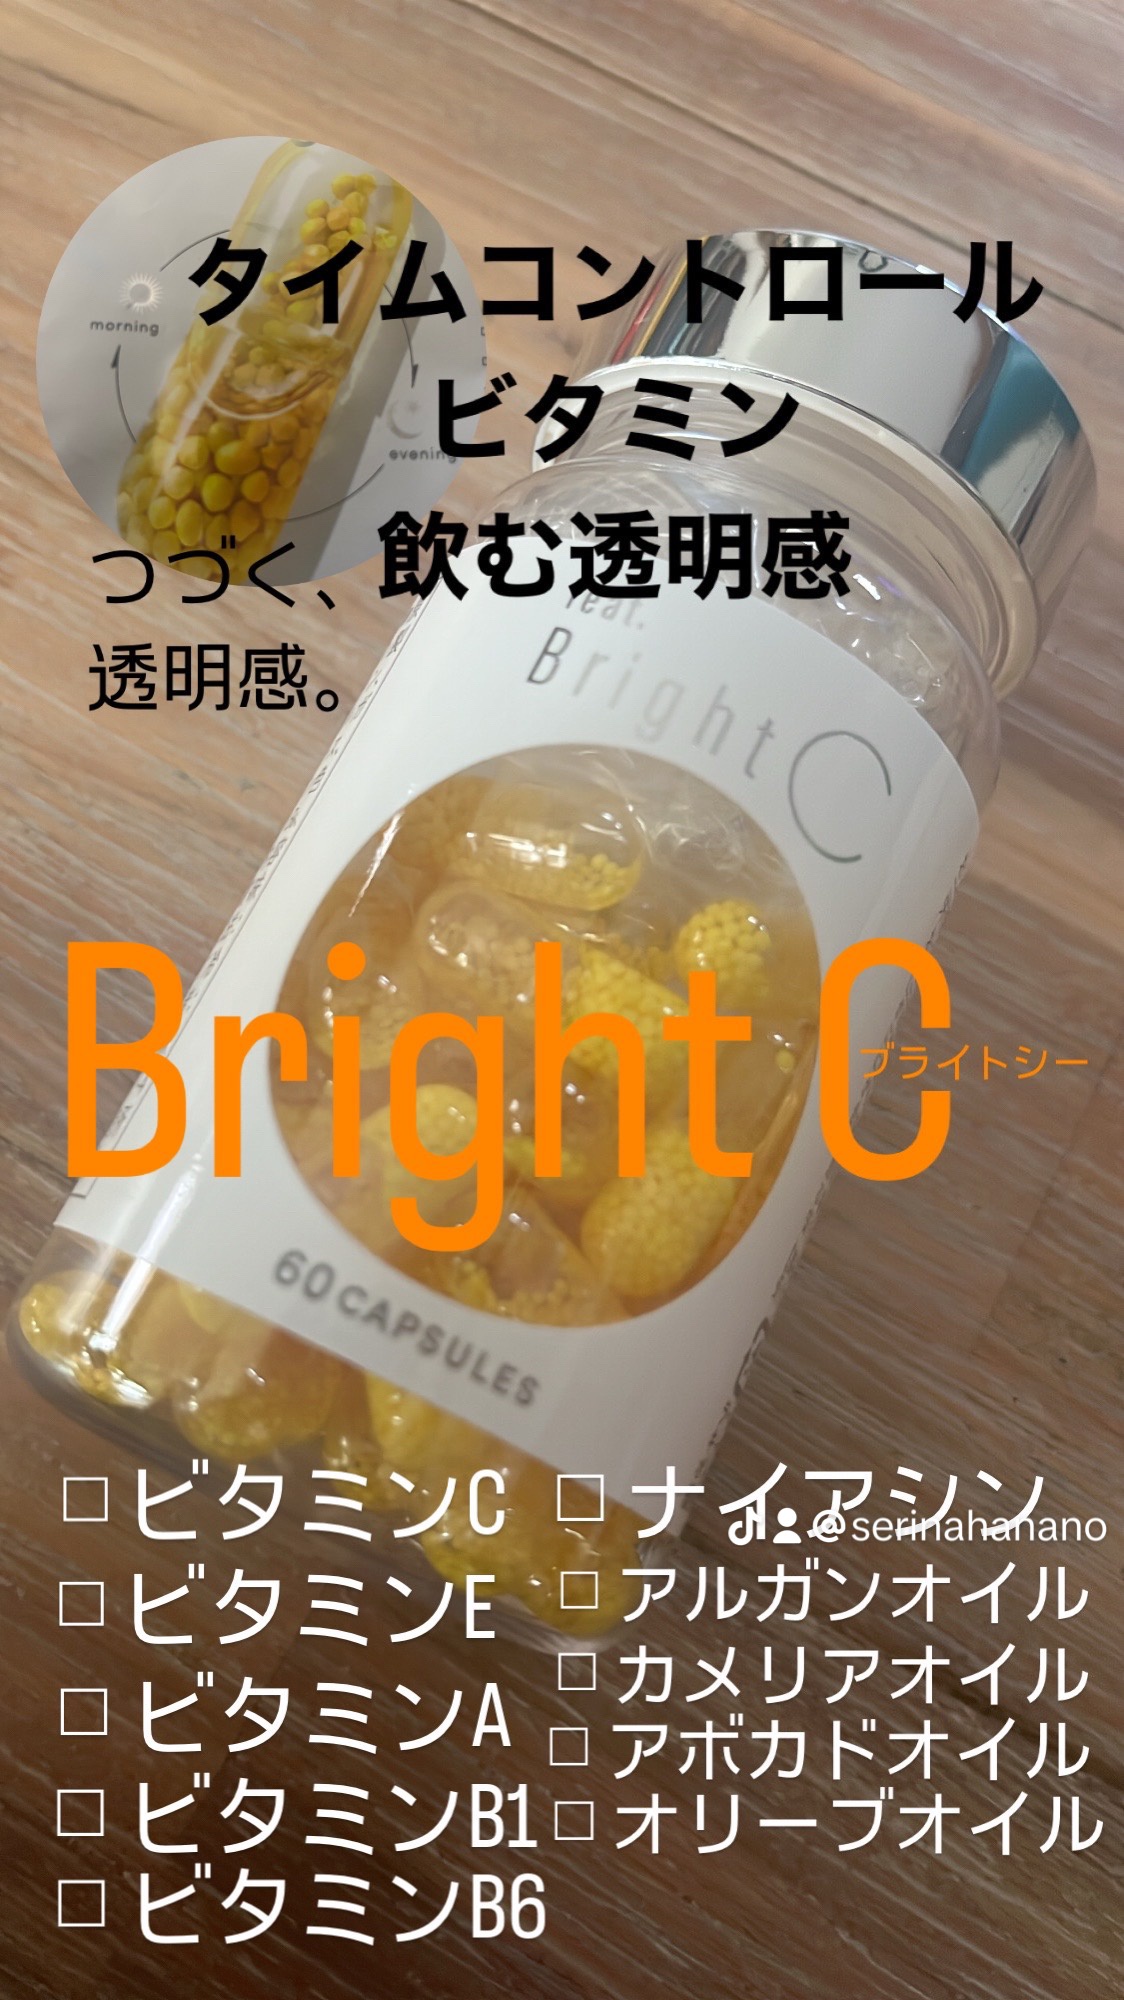 feat. / feat.Bright C 60粒の公式商品情報｜美容・化粧品情報はアット